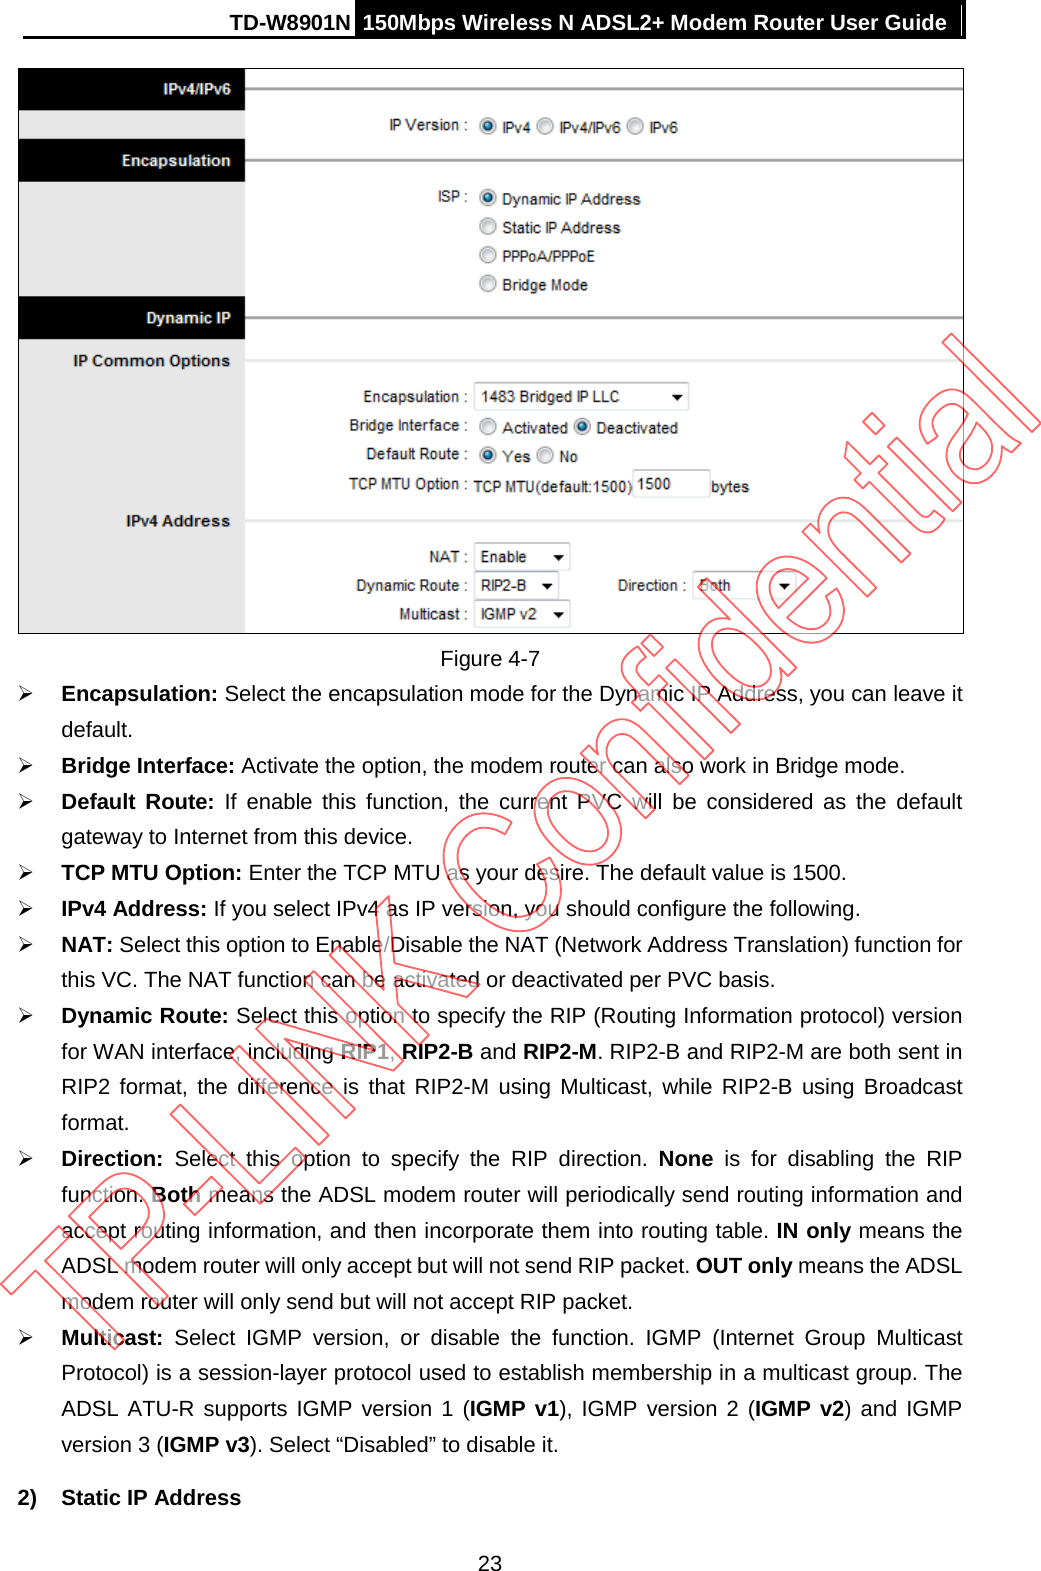 TD-W8901N 150Mbps Wireless N ADSL2+ Modem Router User Guide   Figure 4-7  Encapsulation: Select the encapsulation mode for the Dynamic IP Address, you can leave it default.  Bridge Interface: Activate the option, the modem router can also work in Bridge mode.  Default Route: If enable this function, the current PVC will be considered as the default gateway to Internet from this device.  TCP MTU Option: Enter the TCP MTU as your desire. The default value is 1500.  IPv4 Address: If you select IPv4 as IP version, you should configure the following.  NAT: Select this option to Enable/Disable the NAT (Network Address Translation) function for this VC. The NAT function can be activated or deactivated per PVC basis.  Dynamic Route: Select this option to specify the RIP (Routing Information protocol) version for WAN interface, including RIP1, RIP2-B and RIP2-M. RIP2-B and RIP2-M are both sent in RIP2 format, the difference is that RIP2-M  using Multicast, while RIP2-B using Broadcast format.    Direction:  Select this option to specify the RIP direction. None is for disabling the RIP function. Both means the ADSL modem router will periodically send routing information and accept routing information, and then incorporate them into routing table. IN only means the ADSL modem router will only accept but will not send RIP packet. OUT only means the ADSL modem router will only send but will not accept RIP packet.  Multicast:  Select IGMP version, or disable the function. IGMP (Internet Group Multicast Protocol) is a session-layer protocol used to establish membership in a multicast group. The ADSL ATU-R supports IGMP version 1 (IGMP v1), IGMP version 2 (IGMP v2) and IGMP version 3 (IGMP v3). Select “Disabled” to disable it. 2) Static IP Address 23 